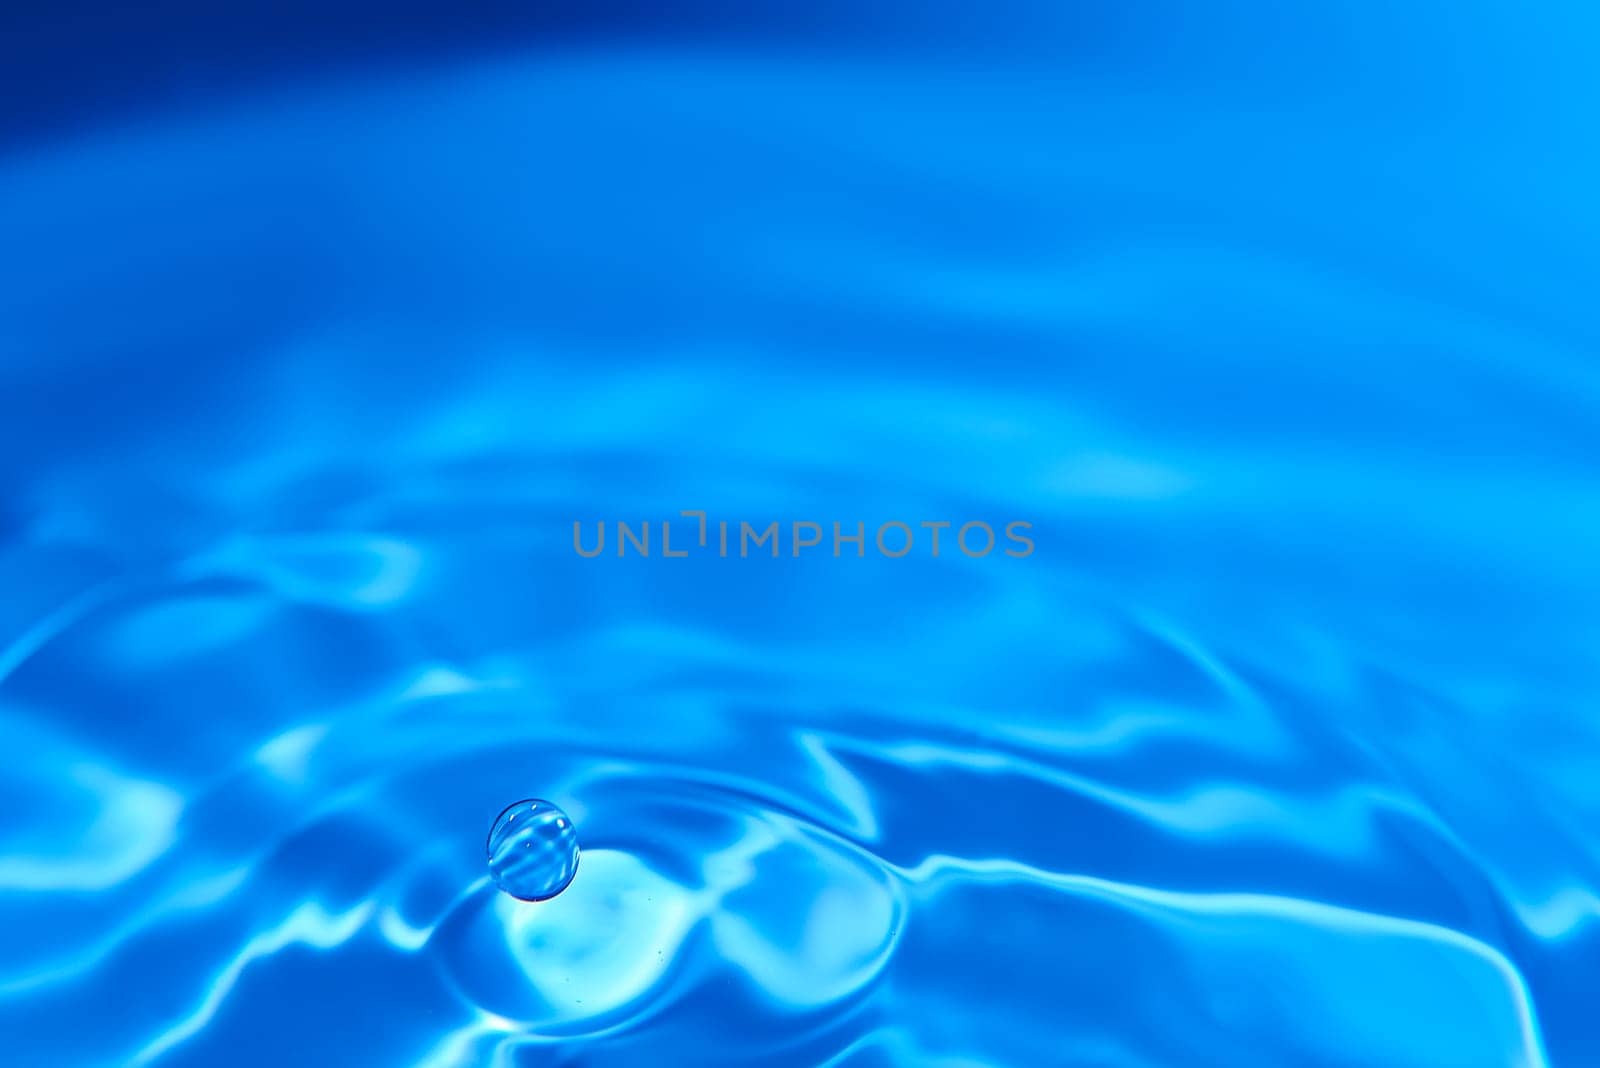 096.One or more drops of water splashing into waves and undefined shapes. Wallpaper by raul_ruiz